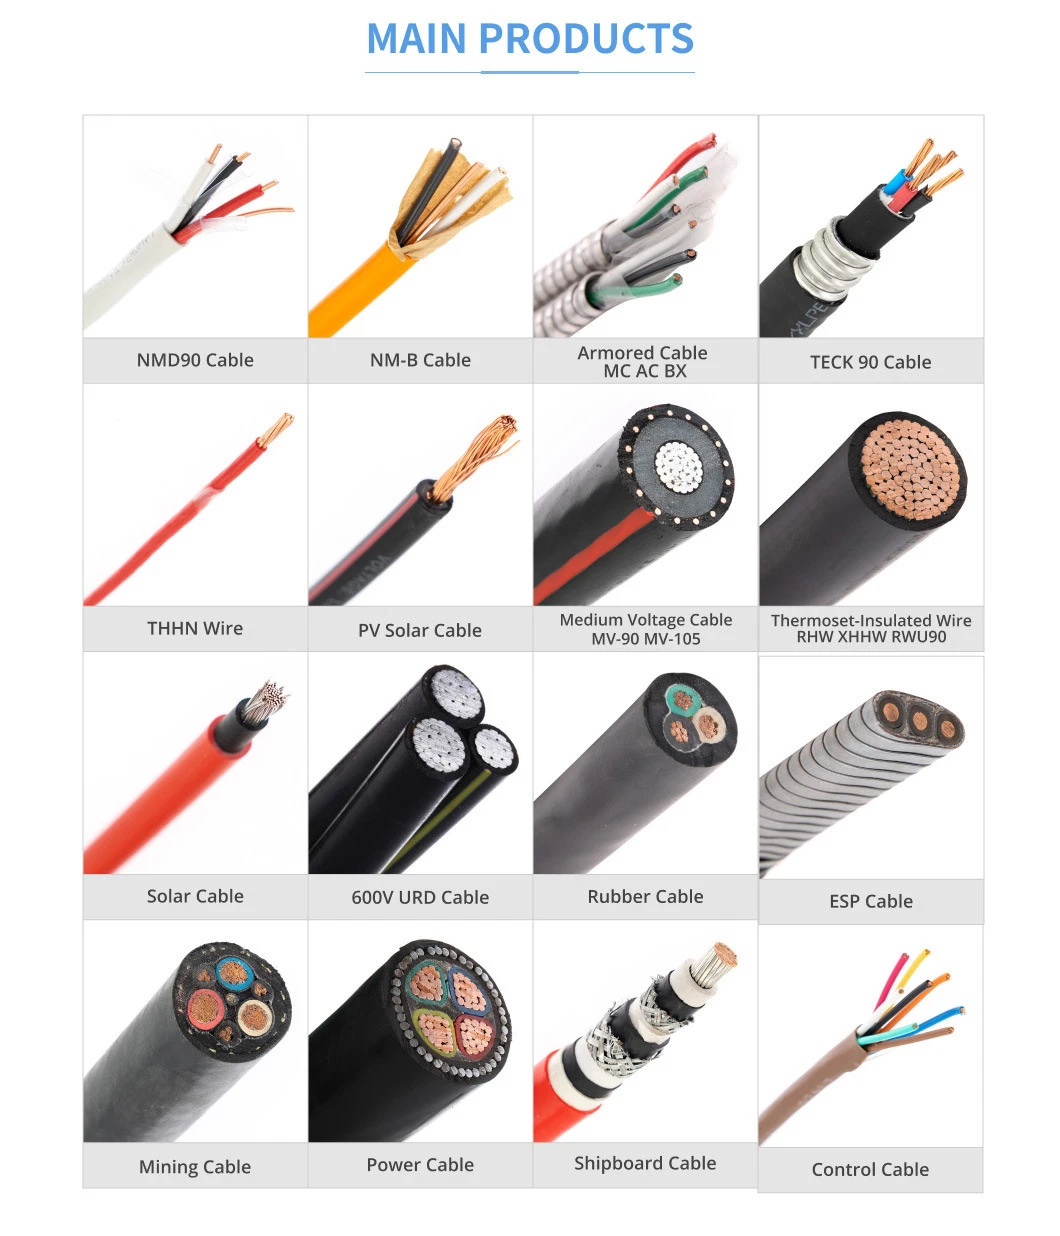 Rvs Cable 100m PVC Insulated Flexible Cable 2 Core 0.75 1.0 1.5 2.5mm Twisted Pair Electric Wires Copper Conductor Cable Wire